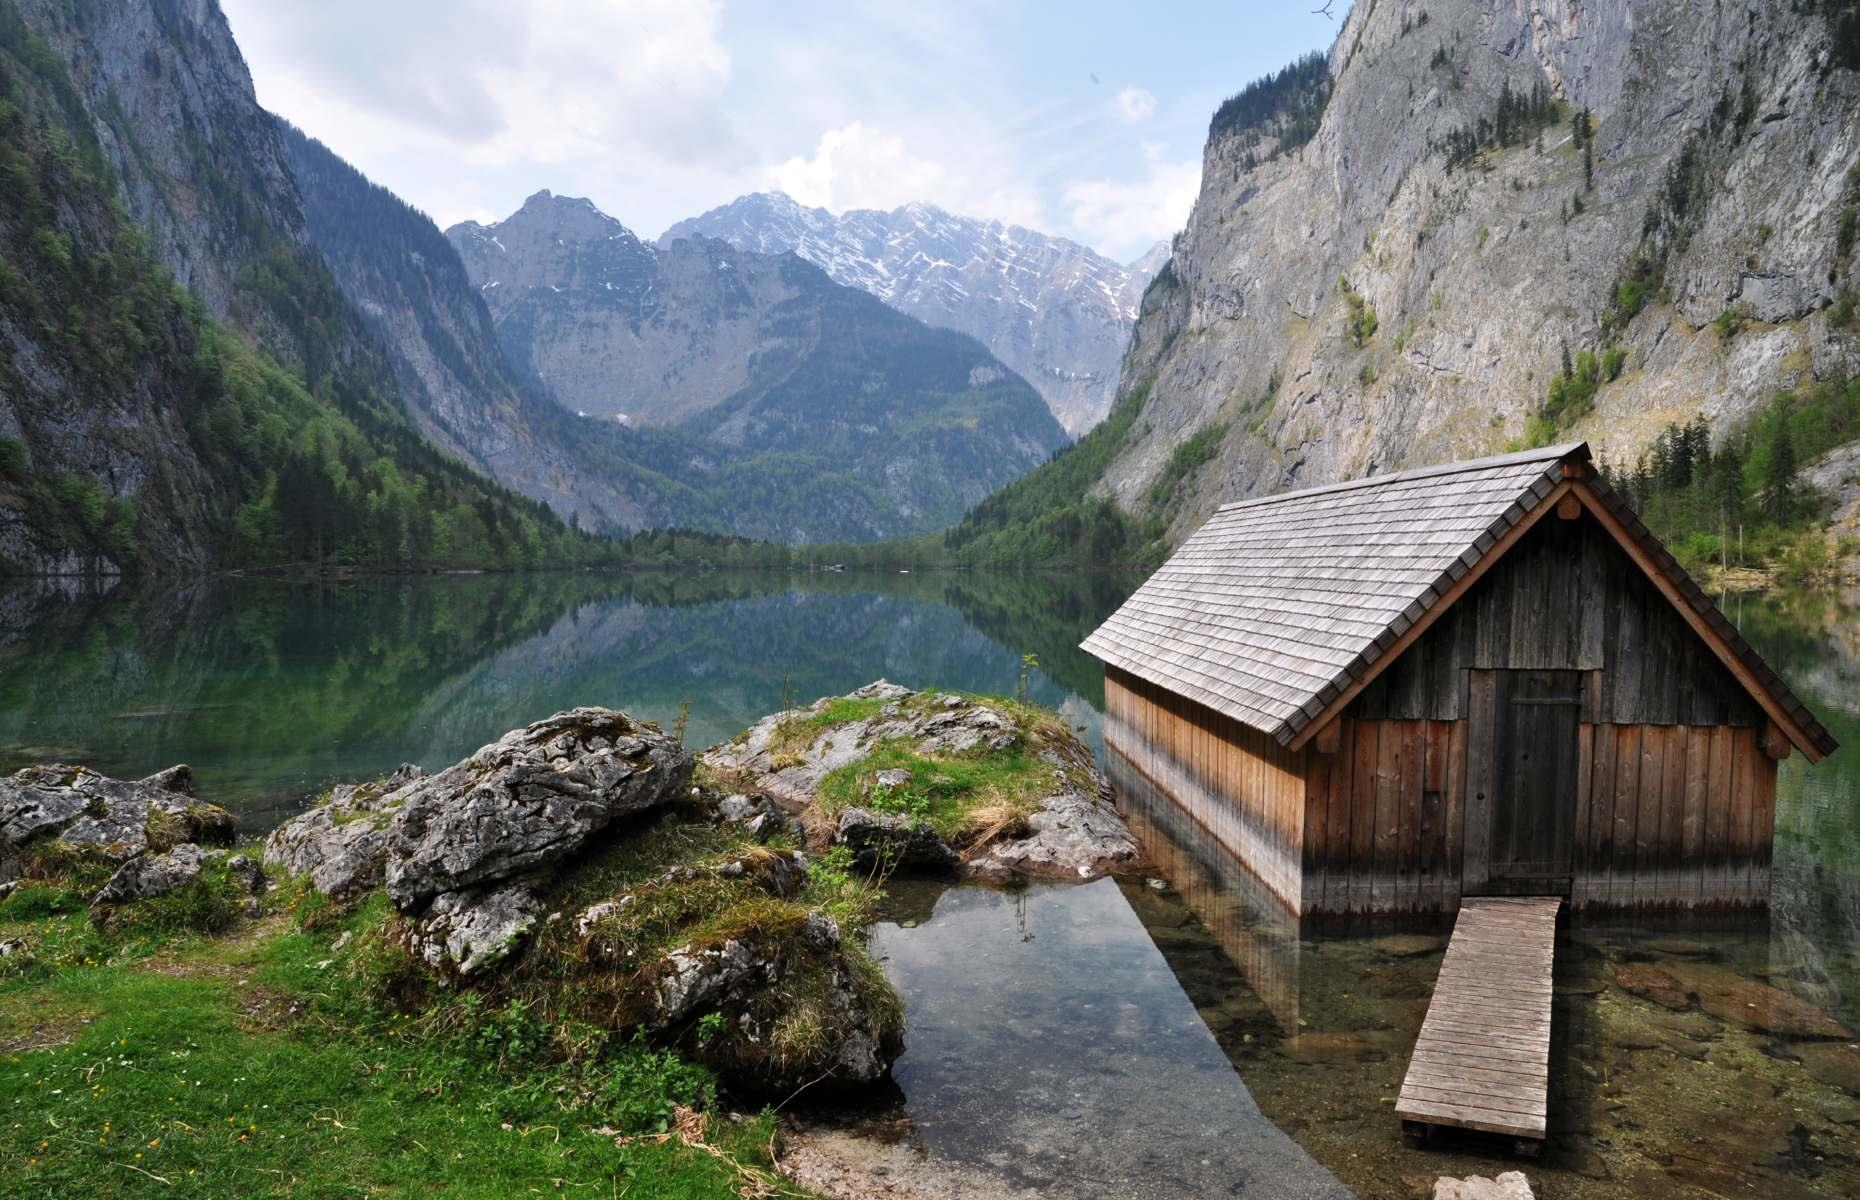 <div>Separated from its big sibling Königssee by a moraine wall, but joined by a hiking trail, Obersee is a small natural lake in Berchtesgaden National Park. On its northern shore lies an abandoned wooden boathouse, thought not to have been used since fishing was outlawed on the lake in 1978 when the national park was founded. It's become an incredibly popular spot for photographers and social media content creators.</div>